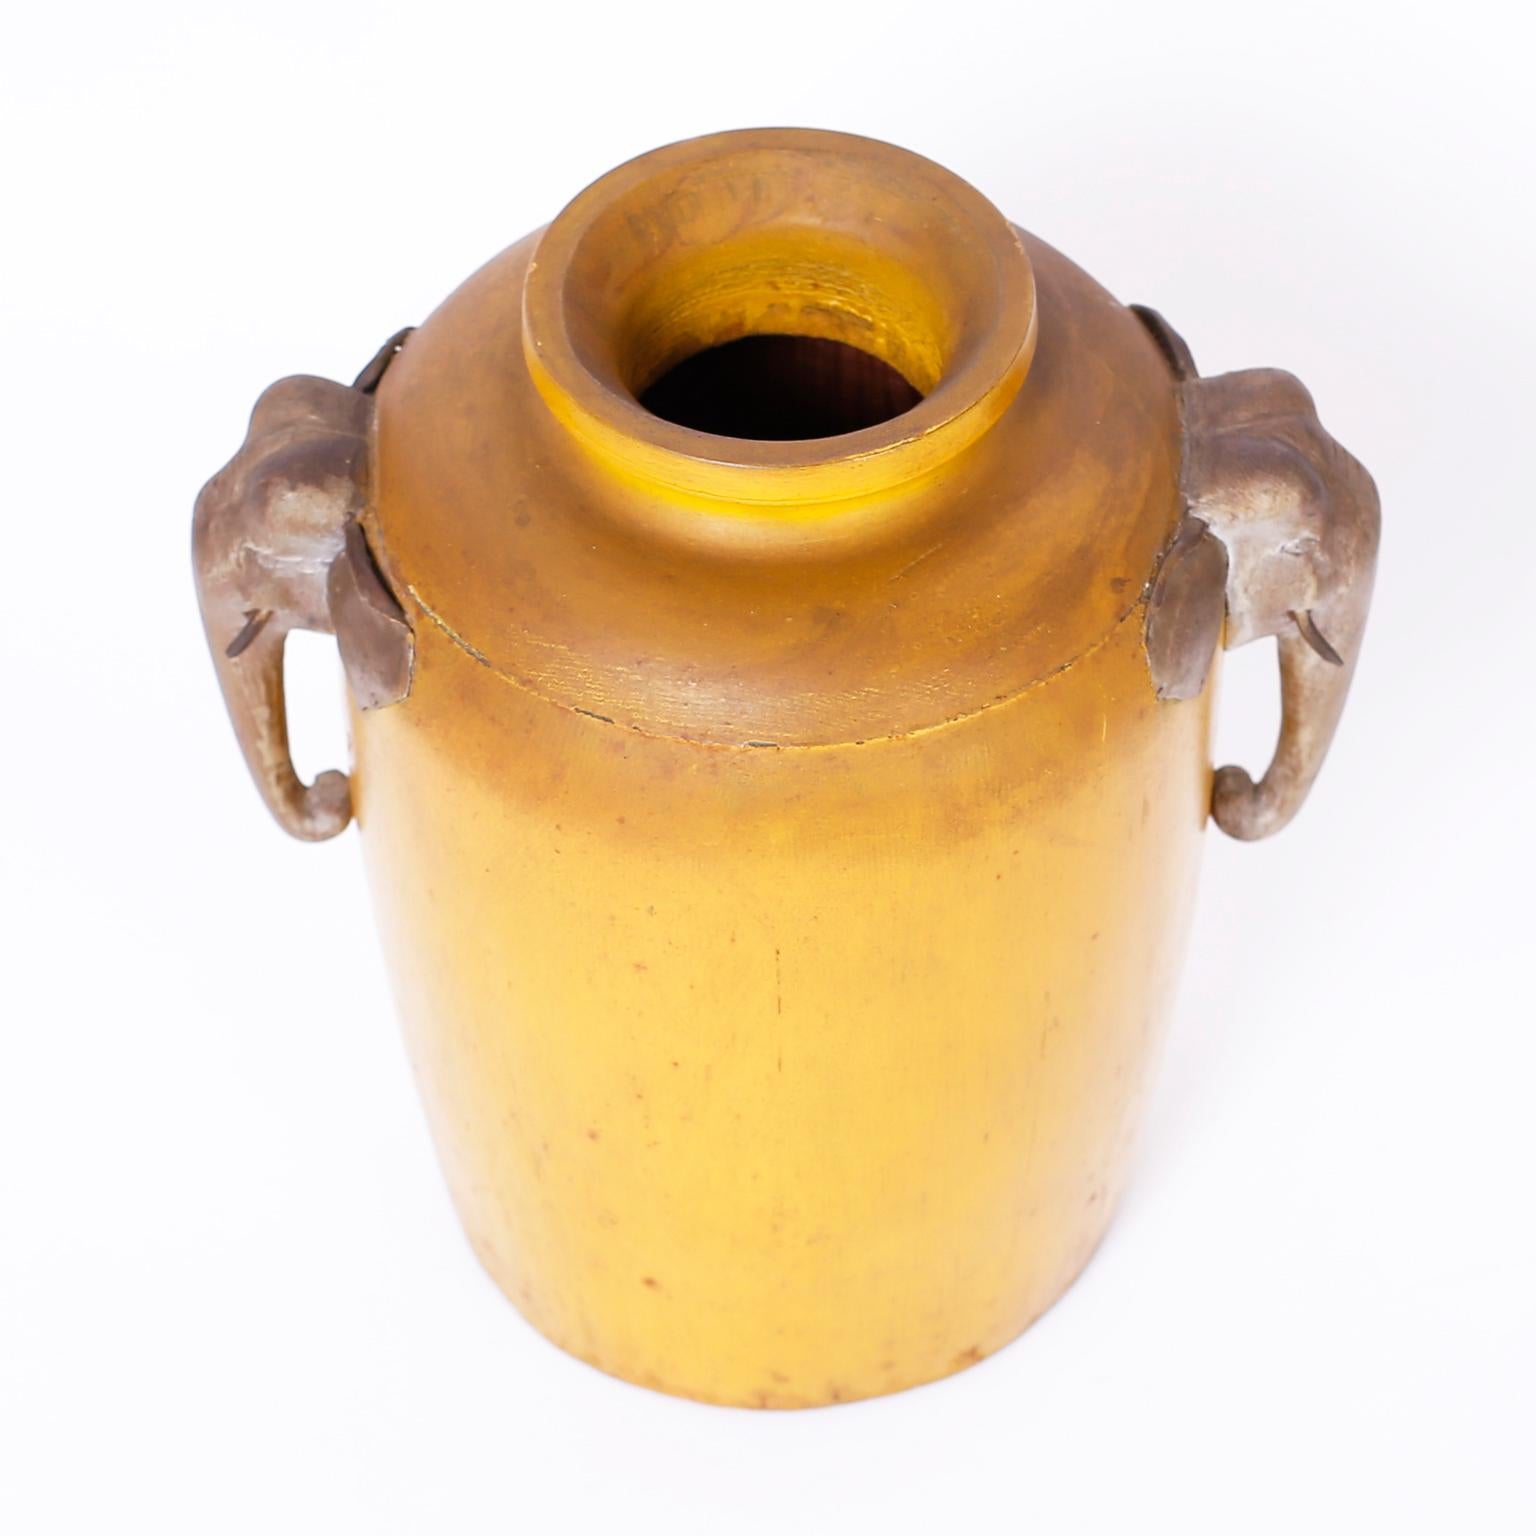 Antique Japanese Meiji period wood vase or vessel with striking aged yellow paint and decorated with carved wood elephant heads having hammered brass ears and tusks.